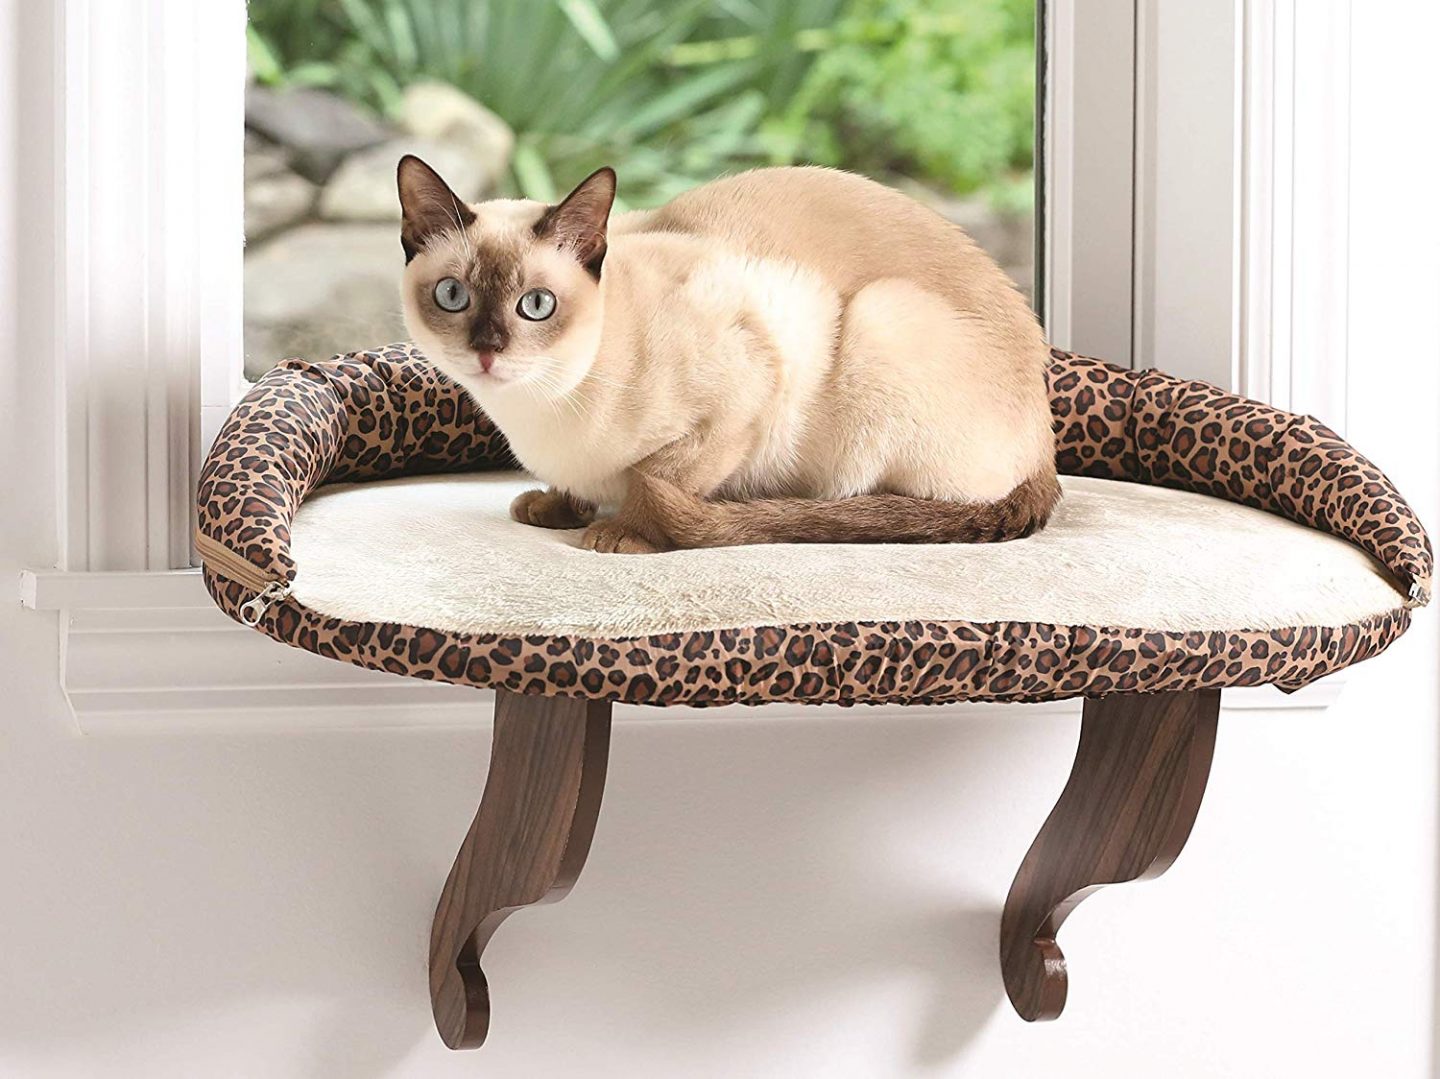 A leopard print window mounted cat bed isn't something you see everyday.  But it's a space saver as well as a statement piece.  Window sill cat beds can really save your floorspace in an apartment!